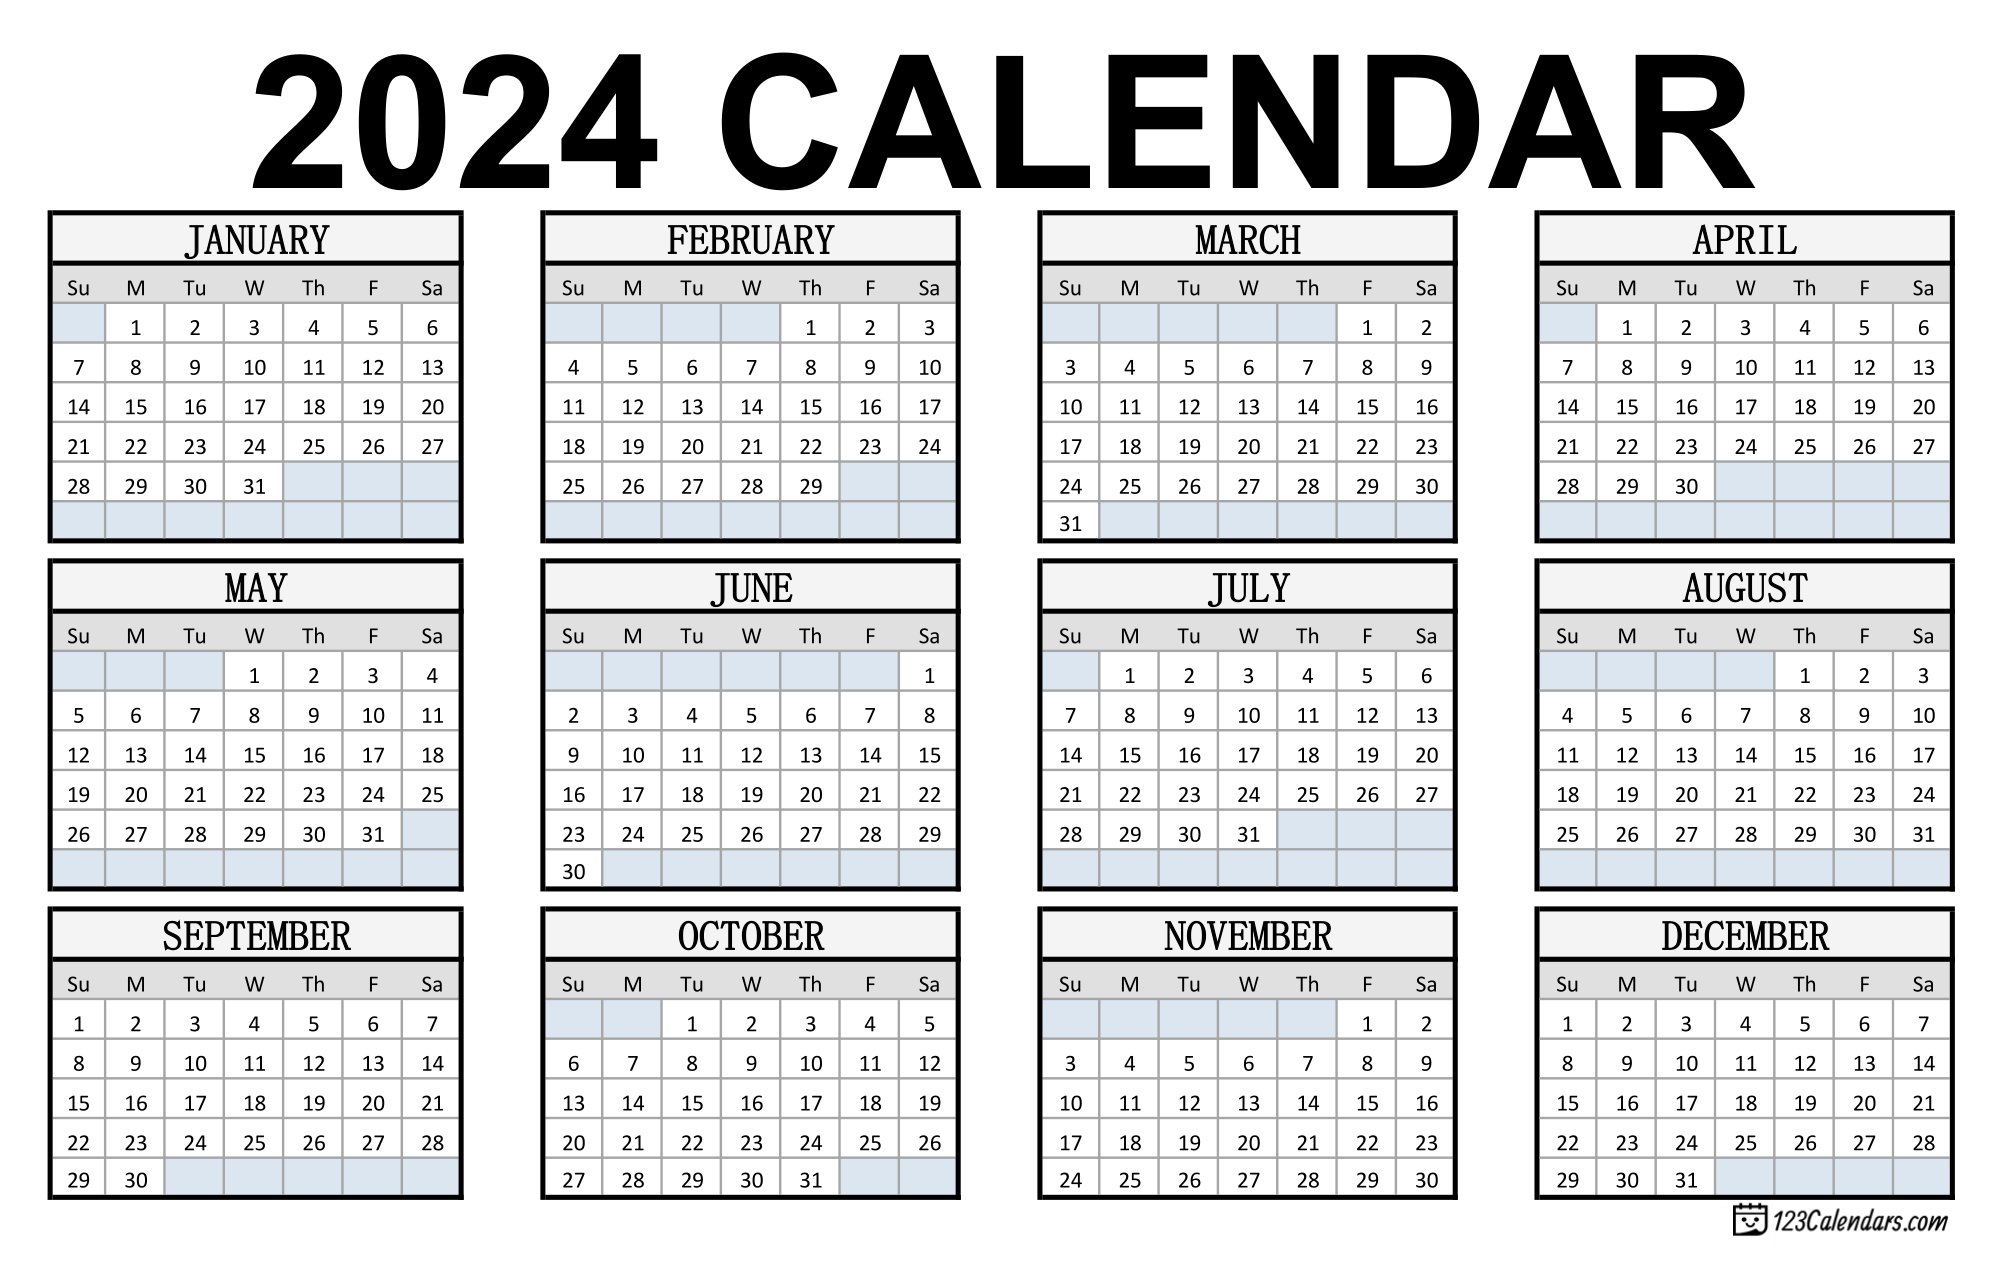 2024 Monthly Planner Cards (Set of 12)